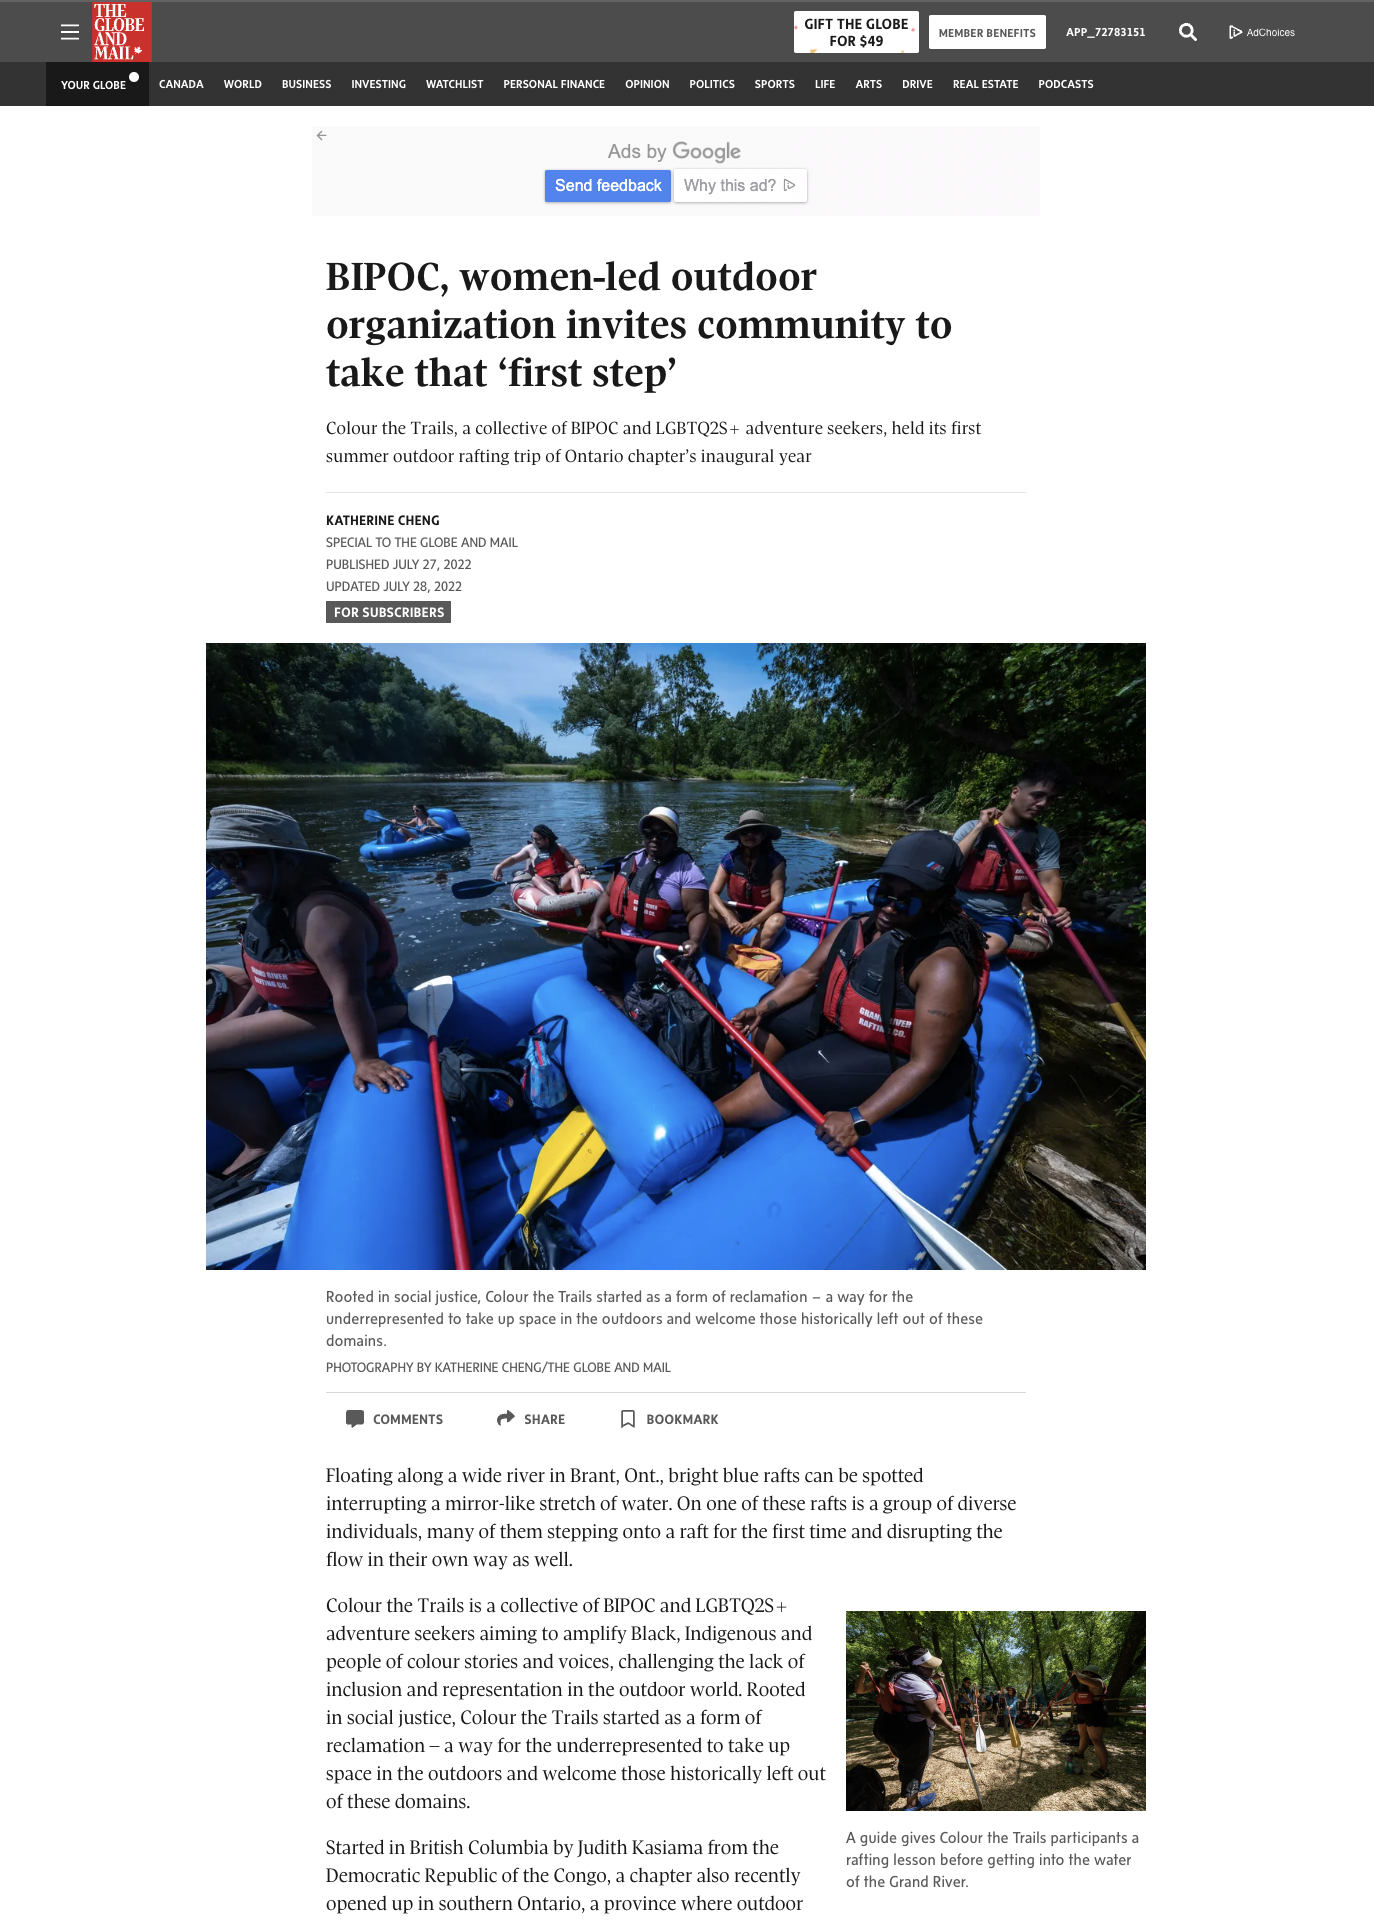 Image from TEARSHEET -  [Globe and Mail] BIPOC, women-led outdoor organization...